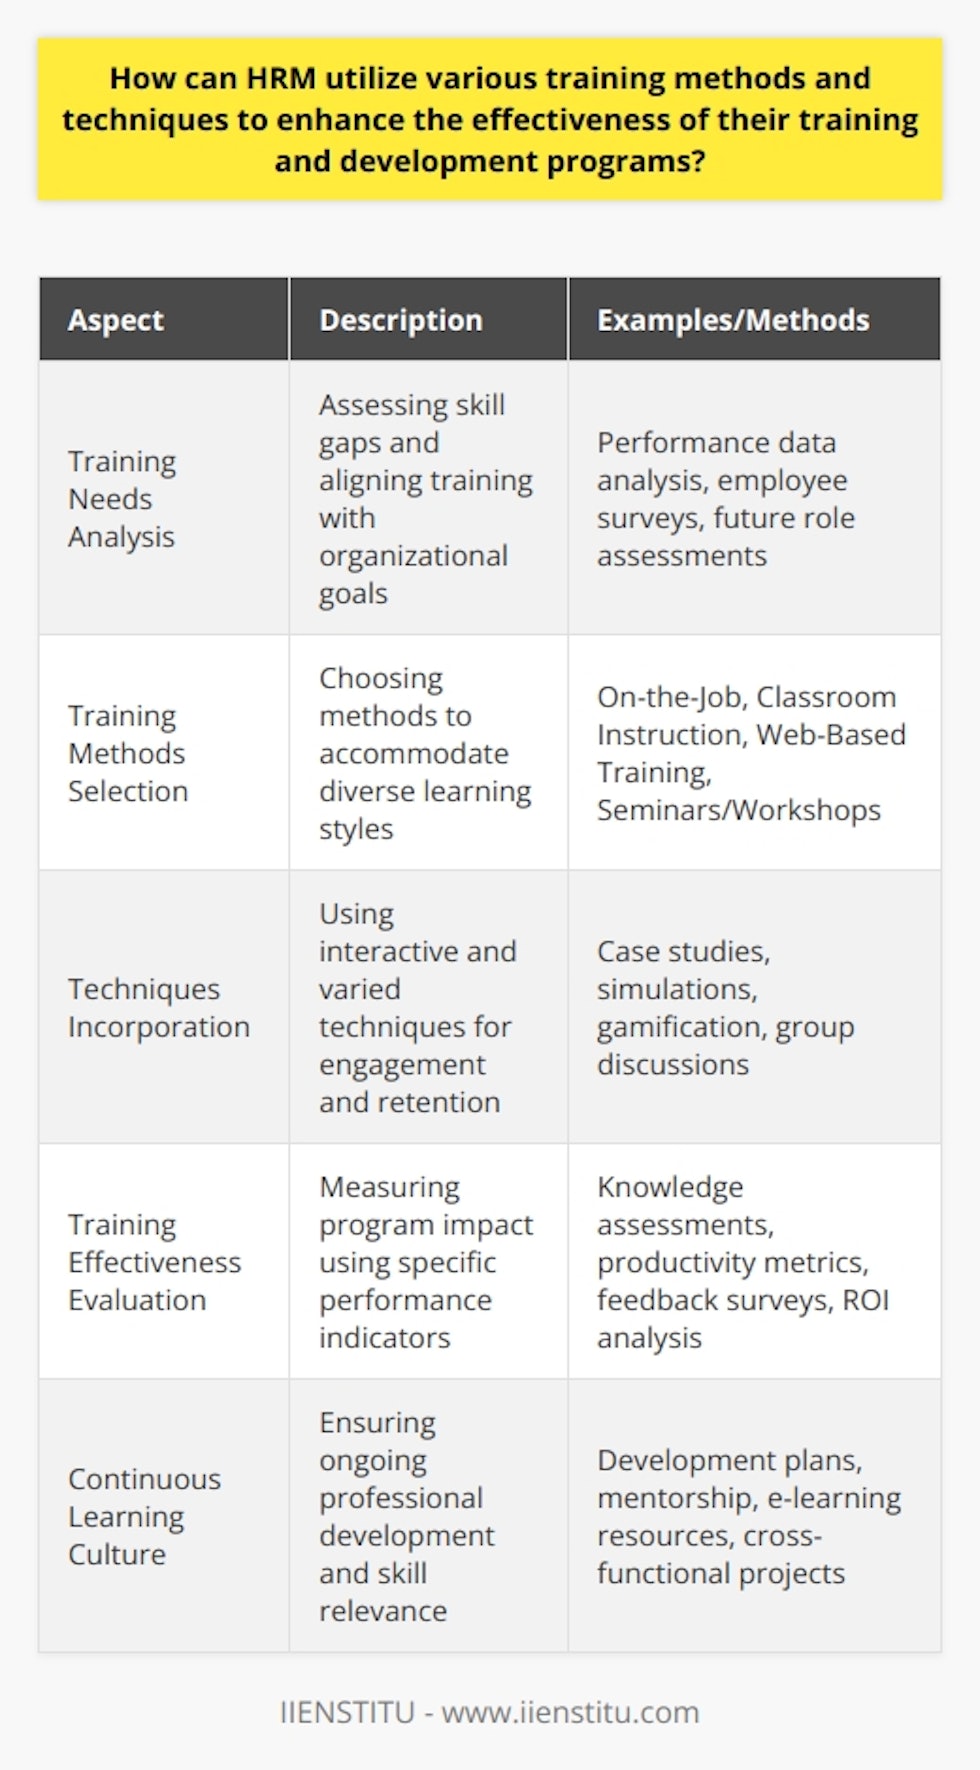 Enhancing the effectiveness of training and development programs is a key objective of Human Resource Management (HRM) in any organization. By understanding the specific training needs of employees and the organization, HRM can craft targeted programs that drive performance and deliver meaningful results. Here’s how HRM can utilize various training methods and techniques to elevate these programs.**Understanding Training Needs**The foundation of an impactful training program lies in a deep understanding of existing gaps in employee competencies and aligning training objectives with organizational goals. HRM must conduct a needs analysis which involves a rigorous assessment of skills, performance data, and future role requirements. Understanding these aspects enables HRM to create training that is not only relevant but also caters to the strategic direction of the organization.**Choosing Suitable Training Methods**The selection of training methods is pivotal in addressing diverse learning styles among employees. Modern HRM leverages a variety of methods including:1. On-the-Job Training: This approach allows employees to learn in the actual work environment, making the learning process hands-on and directly relevant to their daily tasks.   2. Classroom Instruction: Traditional face-to-face learning remains effective, especially when enhanced with interactive elements like role play and group activities.3. Web-Based Training: E-learning platforms like IIENSTITU offer flexibility, allowing employees to learn at their own pace and on their own time, which is particularly beneficial for remote teams or those with scheduling constraints.   4. Seminars and Workshops: These are excellent for collaborating and networking while learning from industry experts or experienced trainers.**Incorporating a Blend of Techniques**Employing varied techniques enriches the learning process and prevents it from becoming monotonous. Interactive techniques such as real-life case studies, discussions, and collaborative projects foster a deeper level of understanding and retention of the material. Gamification and simulations can make learning more compelling and enjoyable, thereby increasing engagement and motivation.**Evaluating Training Effectiveness**Evaluation is key to understanding the impact of a training program. HRM should define performance indicators such as improved productivity, quality of work, and employee retention rates to measure success. Knowledge assessments, skills testing, and feedback surveys are tools that can provide insights into the program's efficacy and areas that need refinement. HRM can also measure return on investment by looking at the overall performance improvement against the cost of the training.**Offering Continuous Learning Opportunities**HRM should foster a culture of continuous professional development. This can be achieved by providing access to ongoing learning resources, creating individual development plans, establishing mentorship programs, or enabling participation in cross-functional projects. Encouraging and facilitating continuous learning ensures that employees’ skills remain sharp and that the organization adapts to industry changes smoothly.**Conclusion**By understanding the specific training needs, selecting suitable methods, blending various engaging techniques, thoroughly evaluating effectiveness, and promoting continual learning, HRM can significantly enhance the effectiveness of training and development programs. This approach not only benefits the individual employees by fostering career growth and satisfaction but also aids the organization by building a robust, skilled workforce poised for ongoing success.